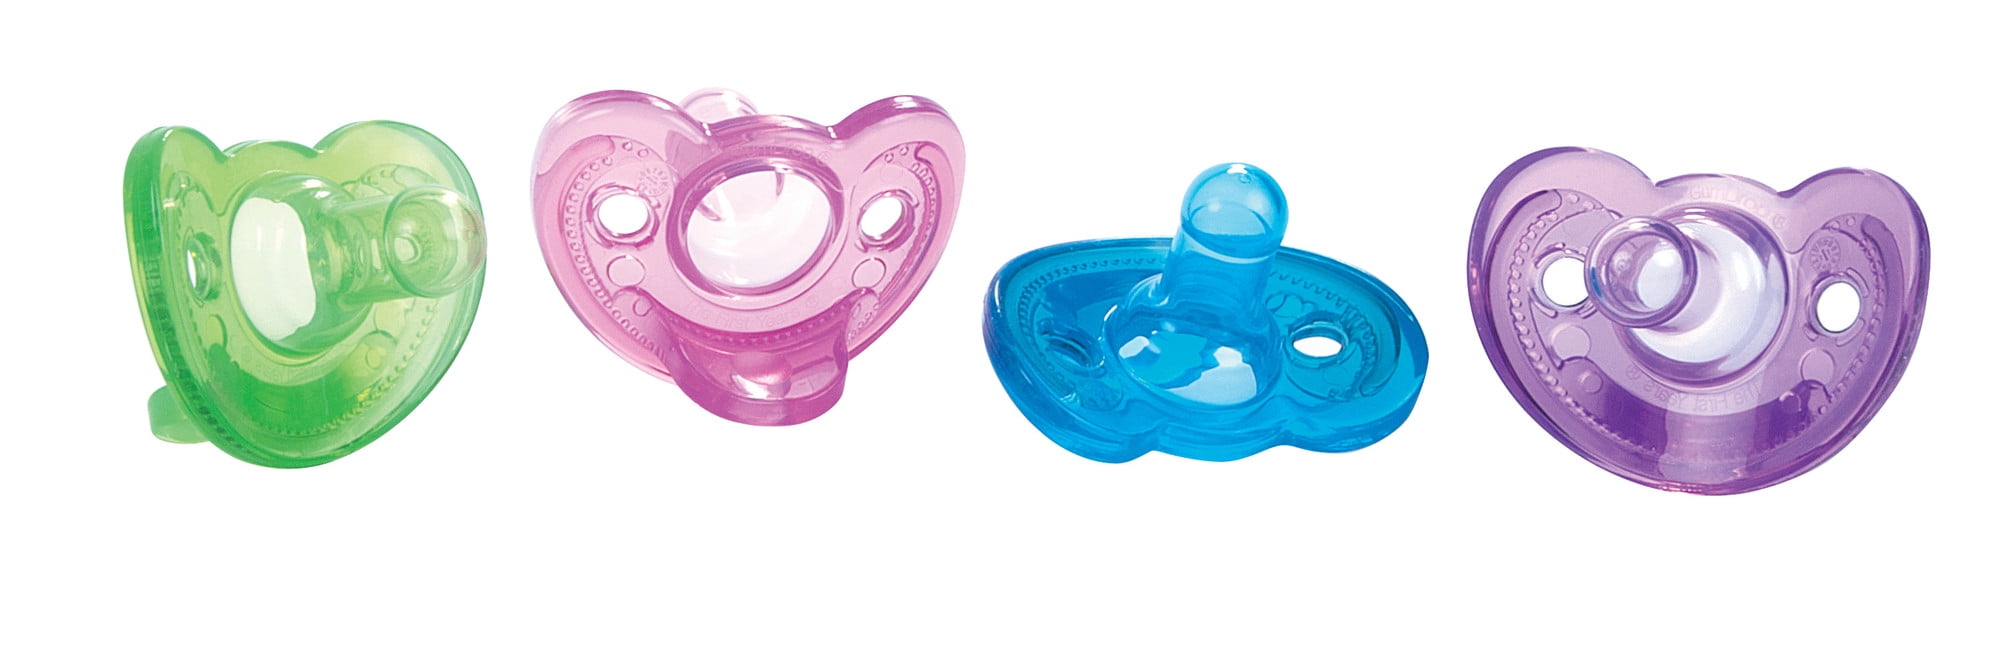 Baby Soothers with Cherry Silicone Teat Blue and Pink Heart design Dummies 